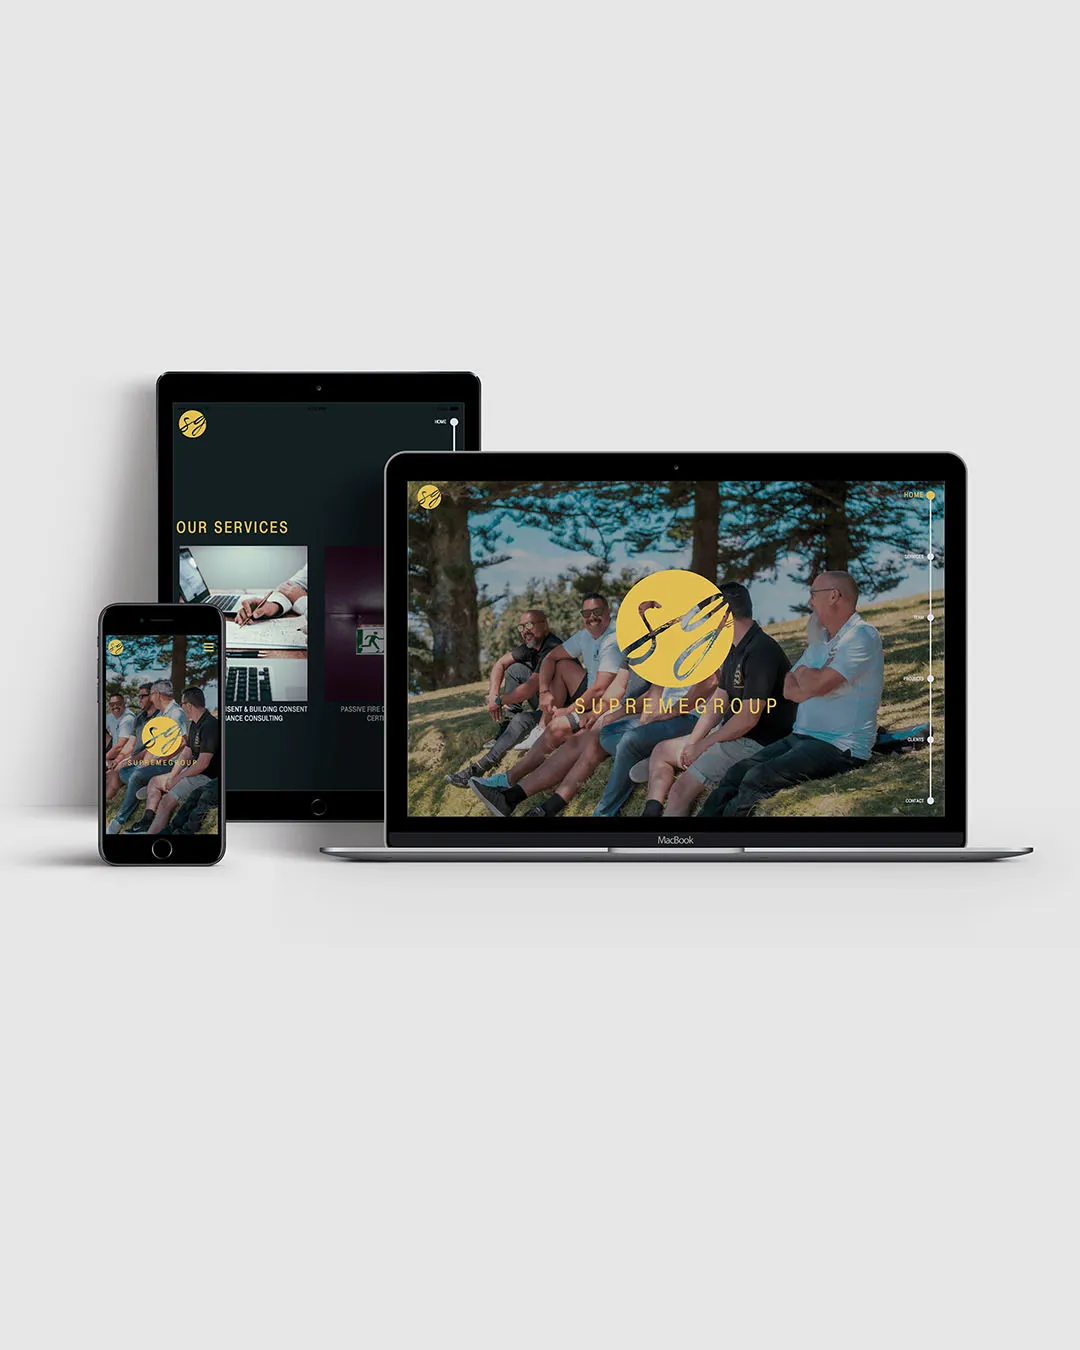 A mockup of the Supremegroup website on 3 devices, a tablet, an iphone, and a macbook.